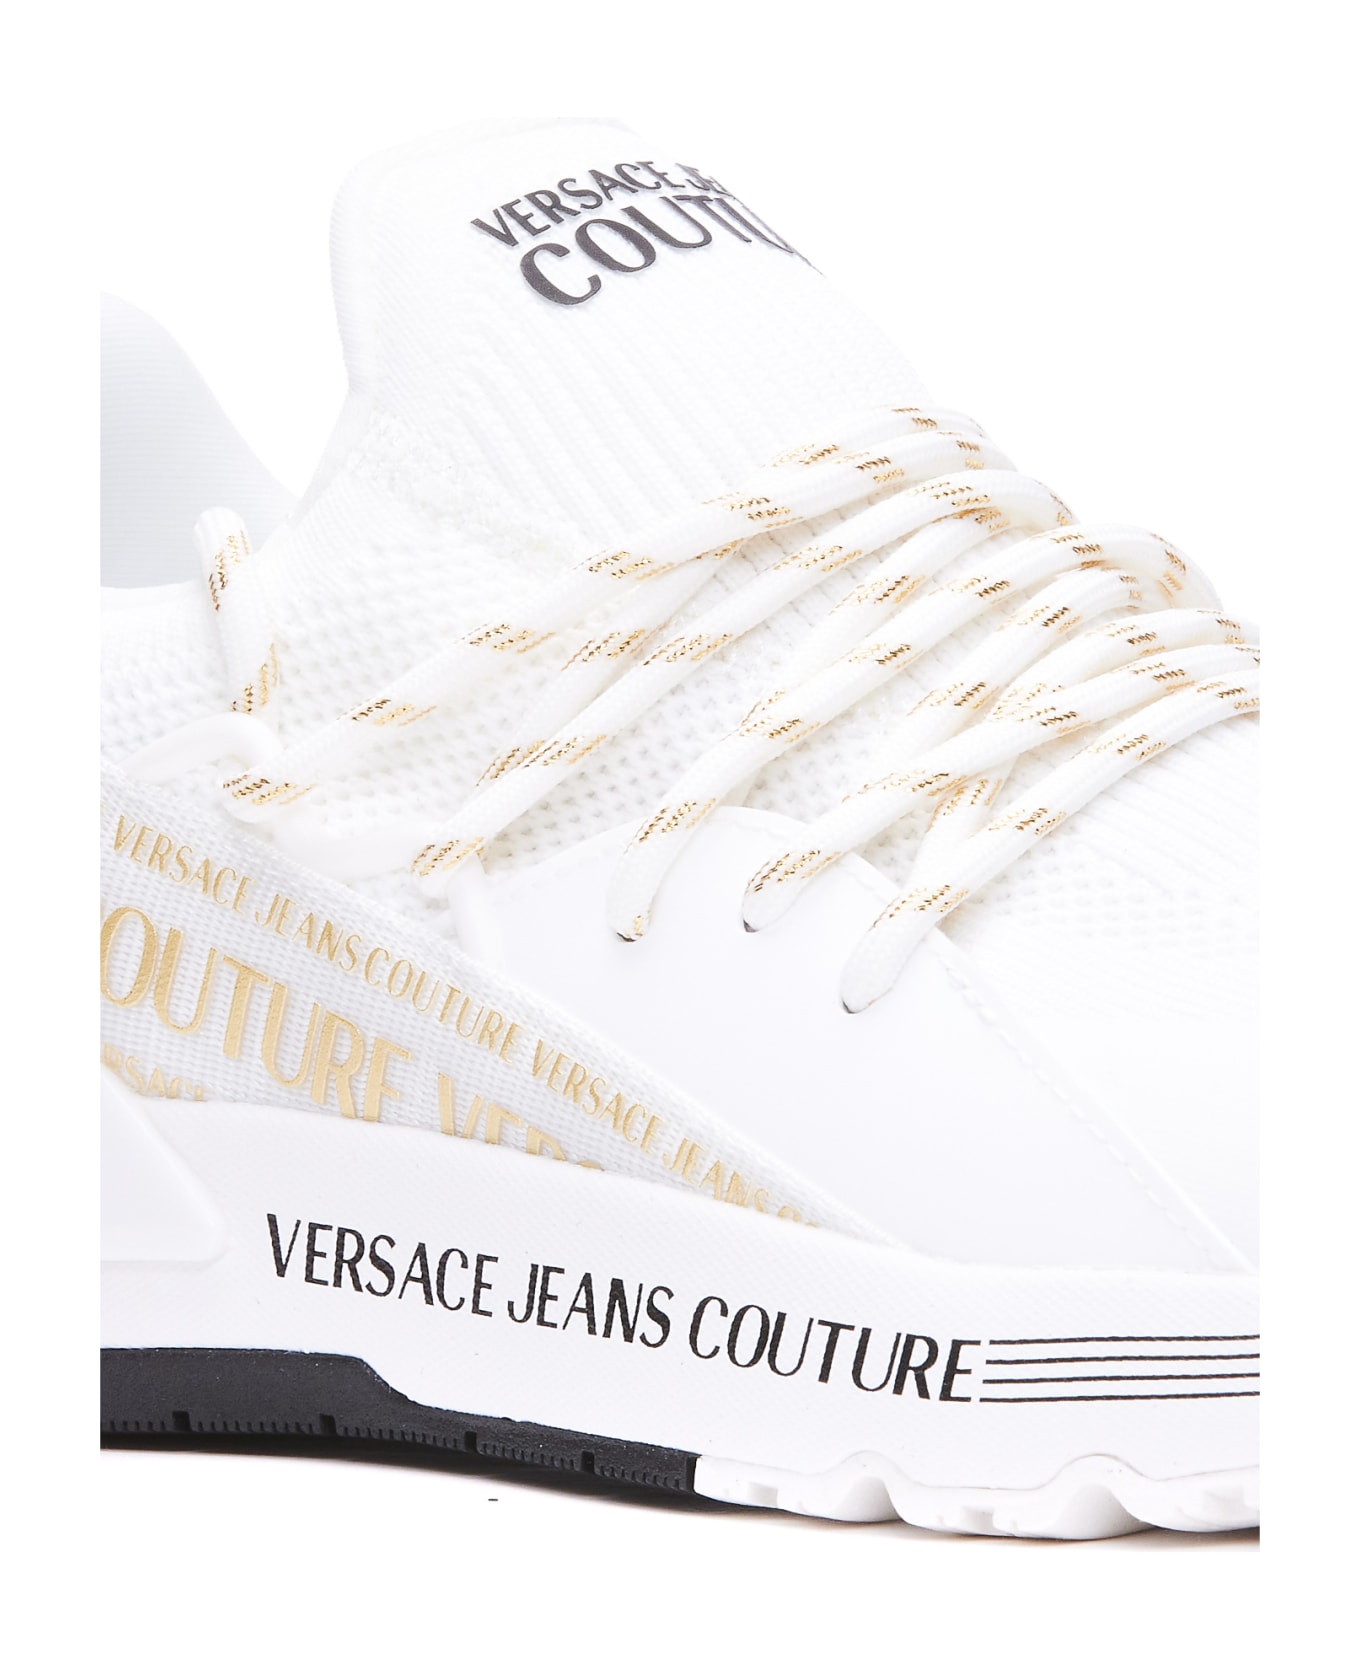 Versace Jeans Couture Dynamic Sneakers - WHITE GOLD